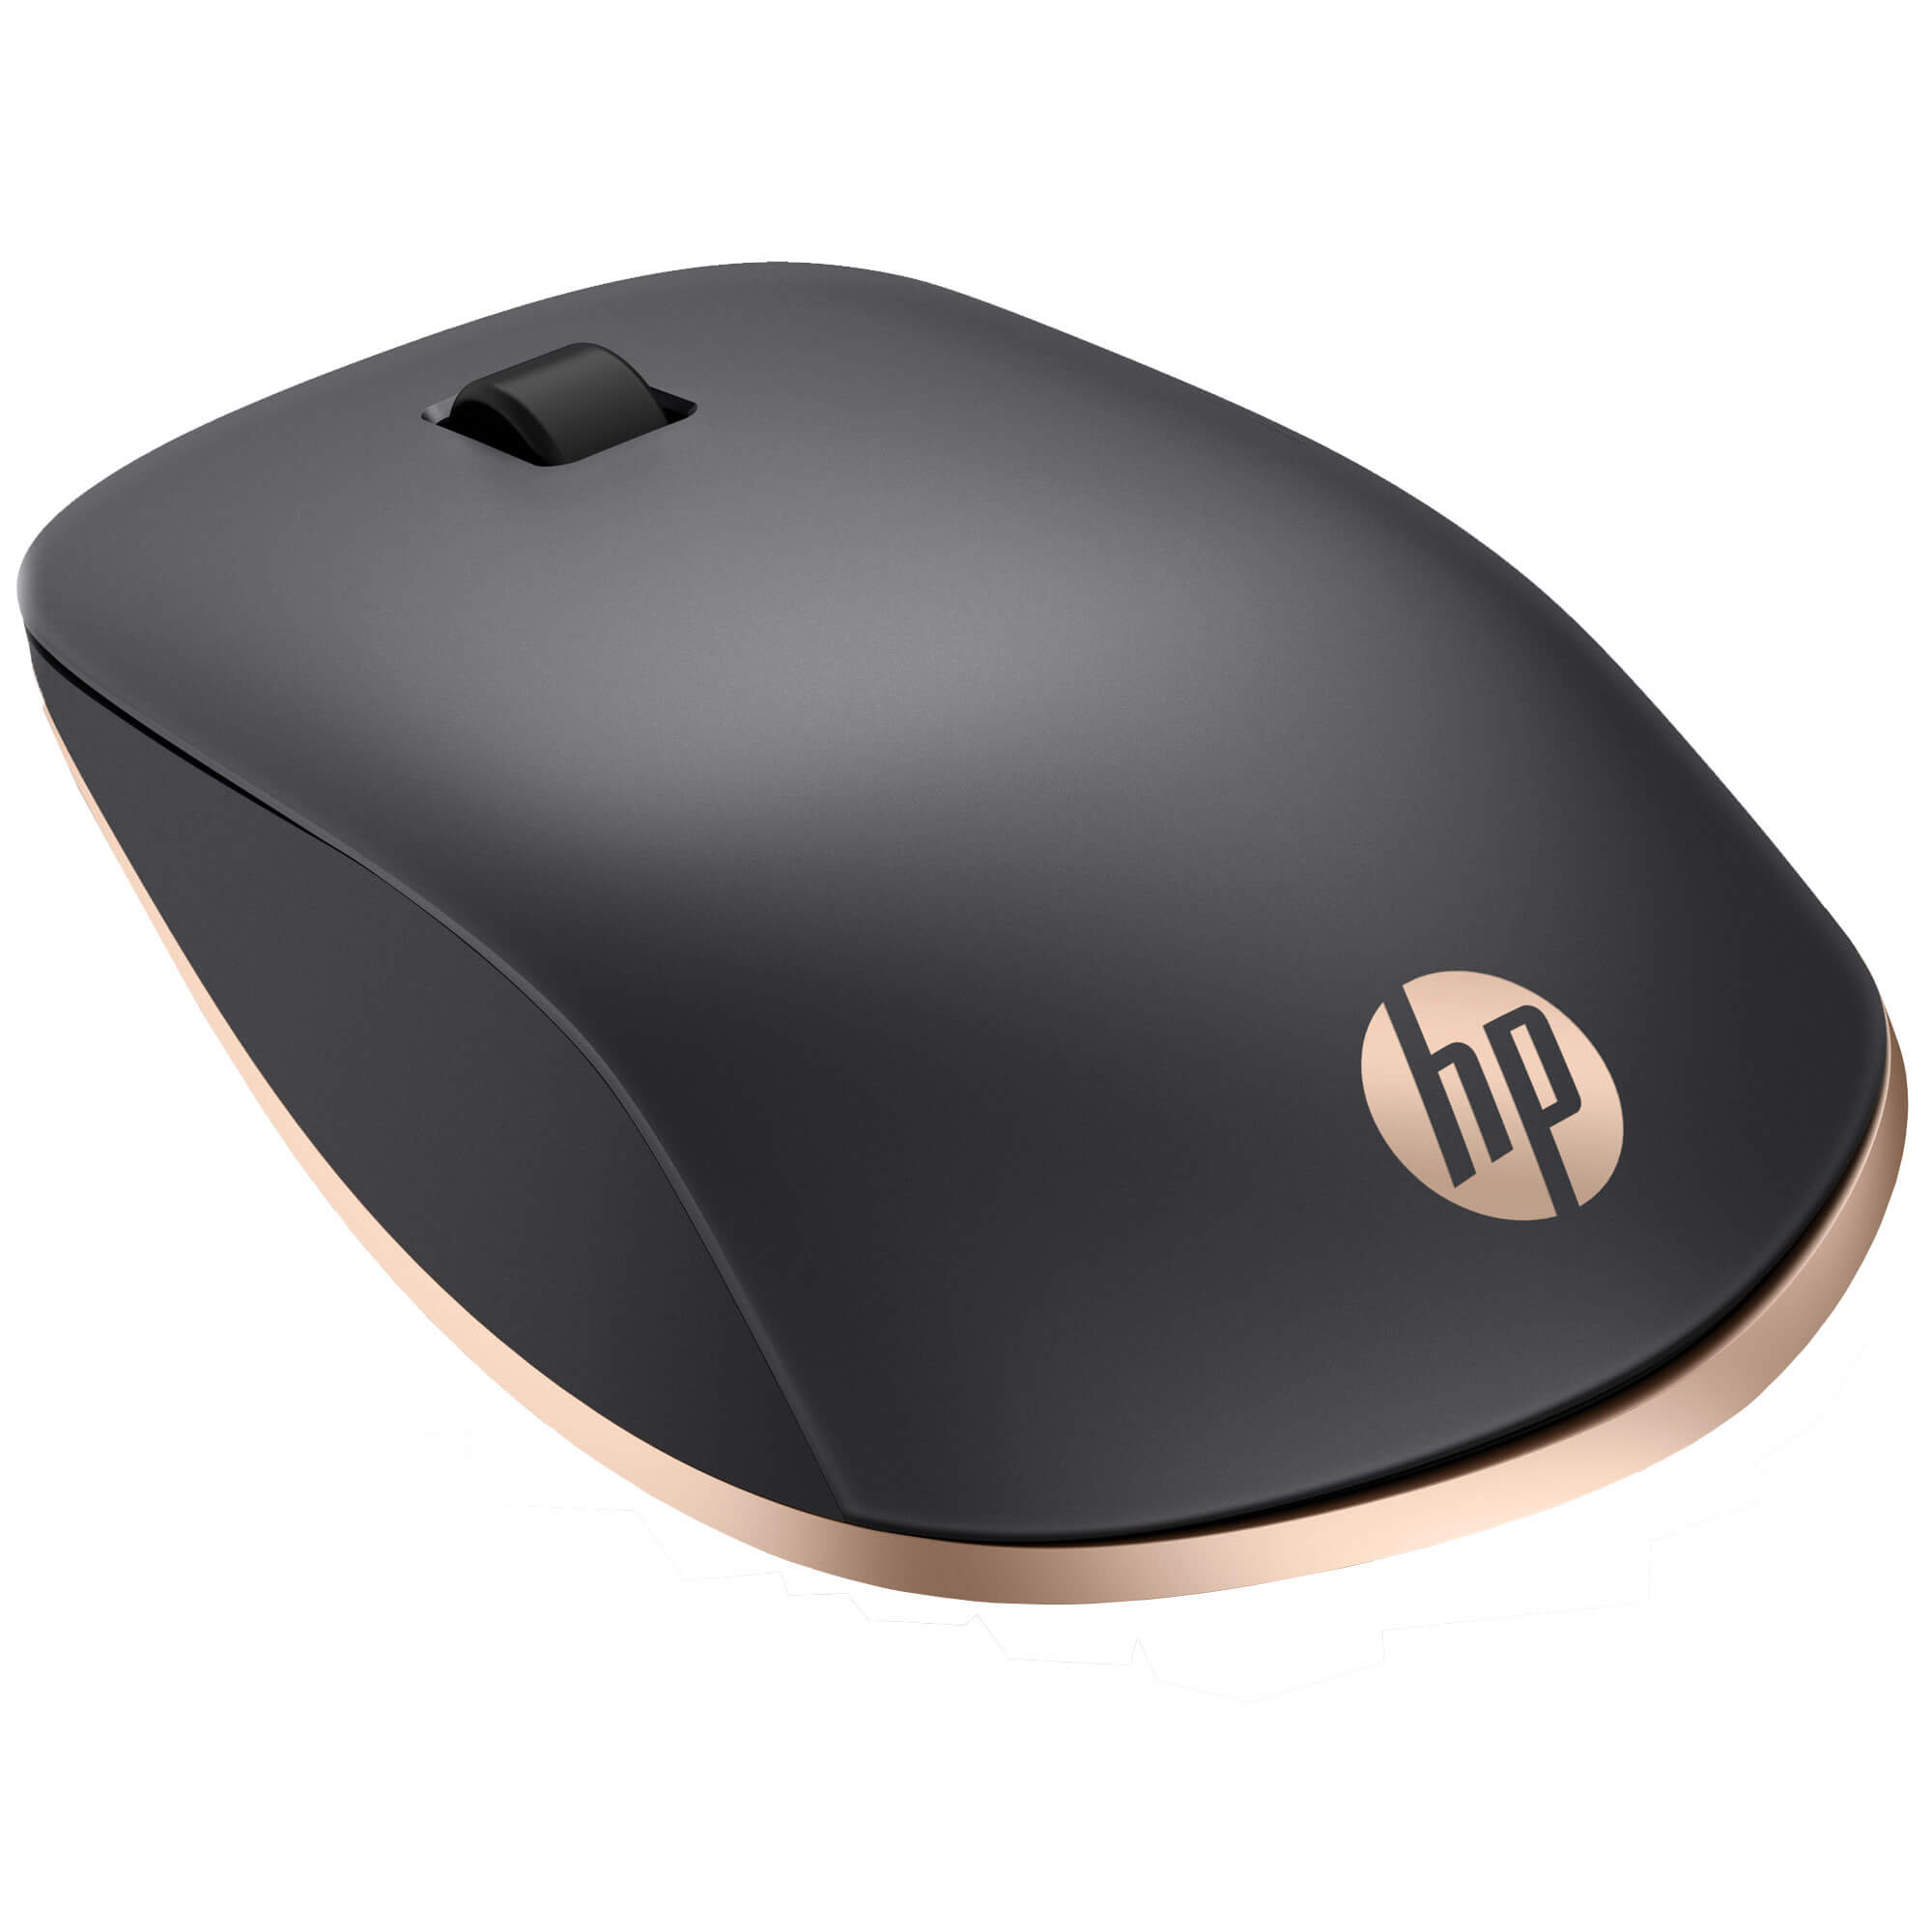 Mouse bluetooth HP Z5000, Gri